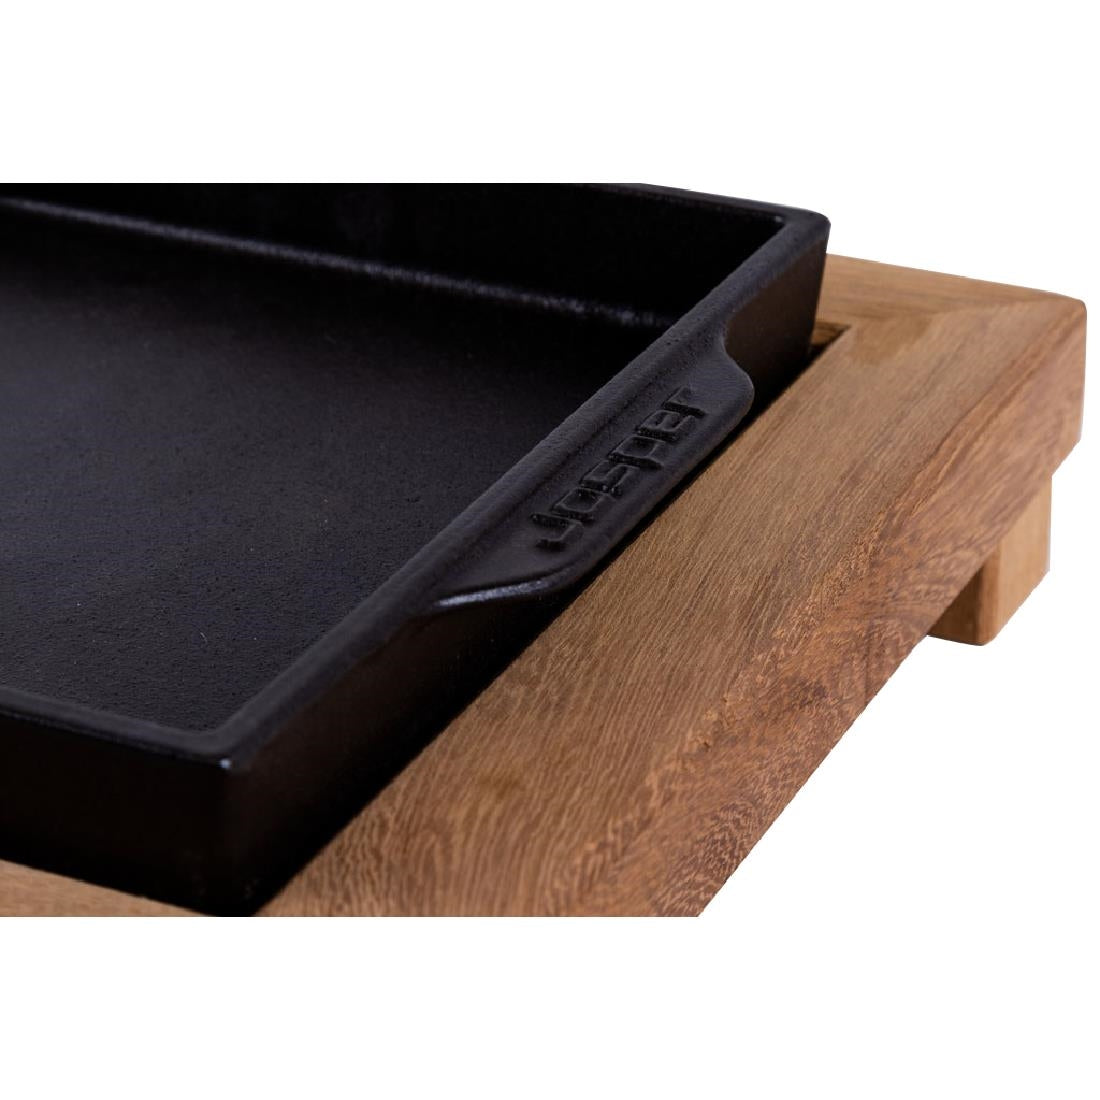 AT329 Josper Charcoal Oven Cast Iron Service Tray and Platter 200x200mm